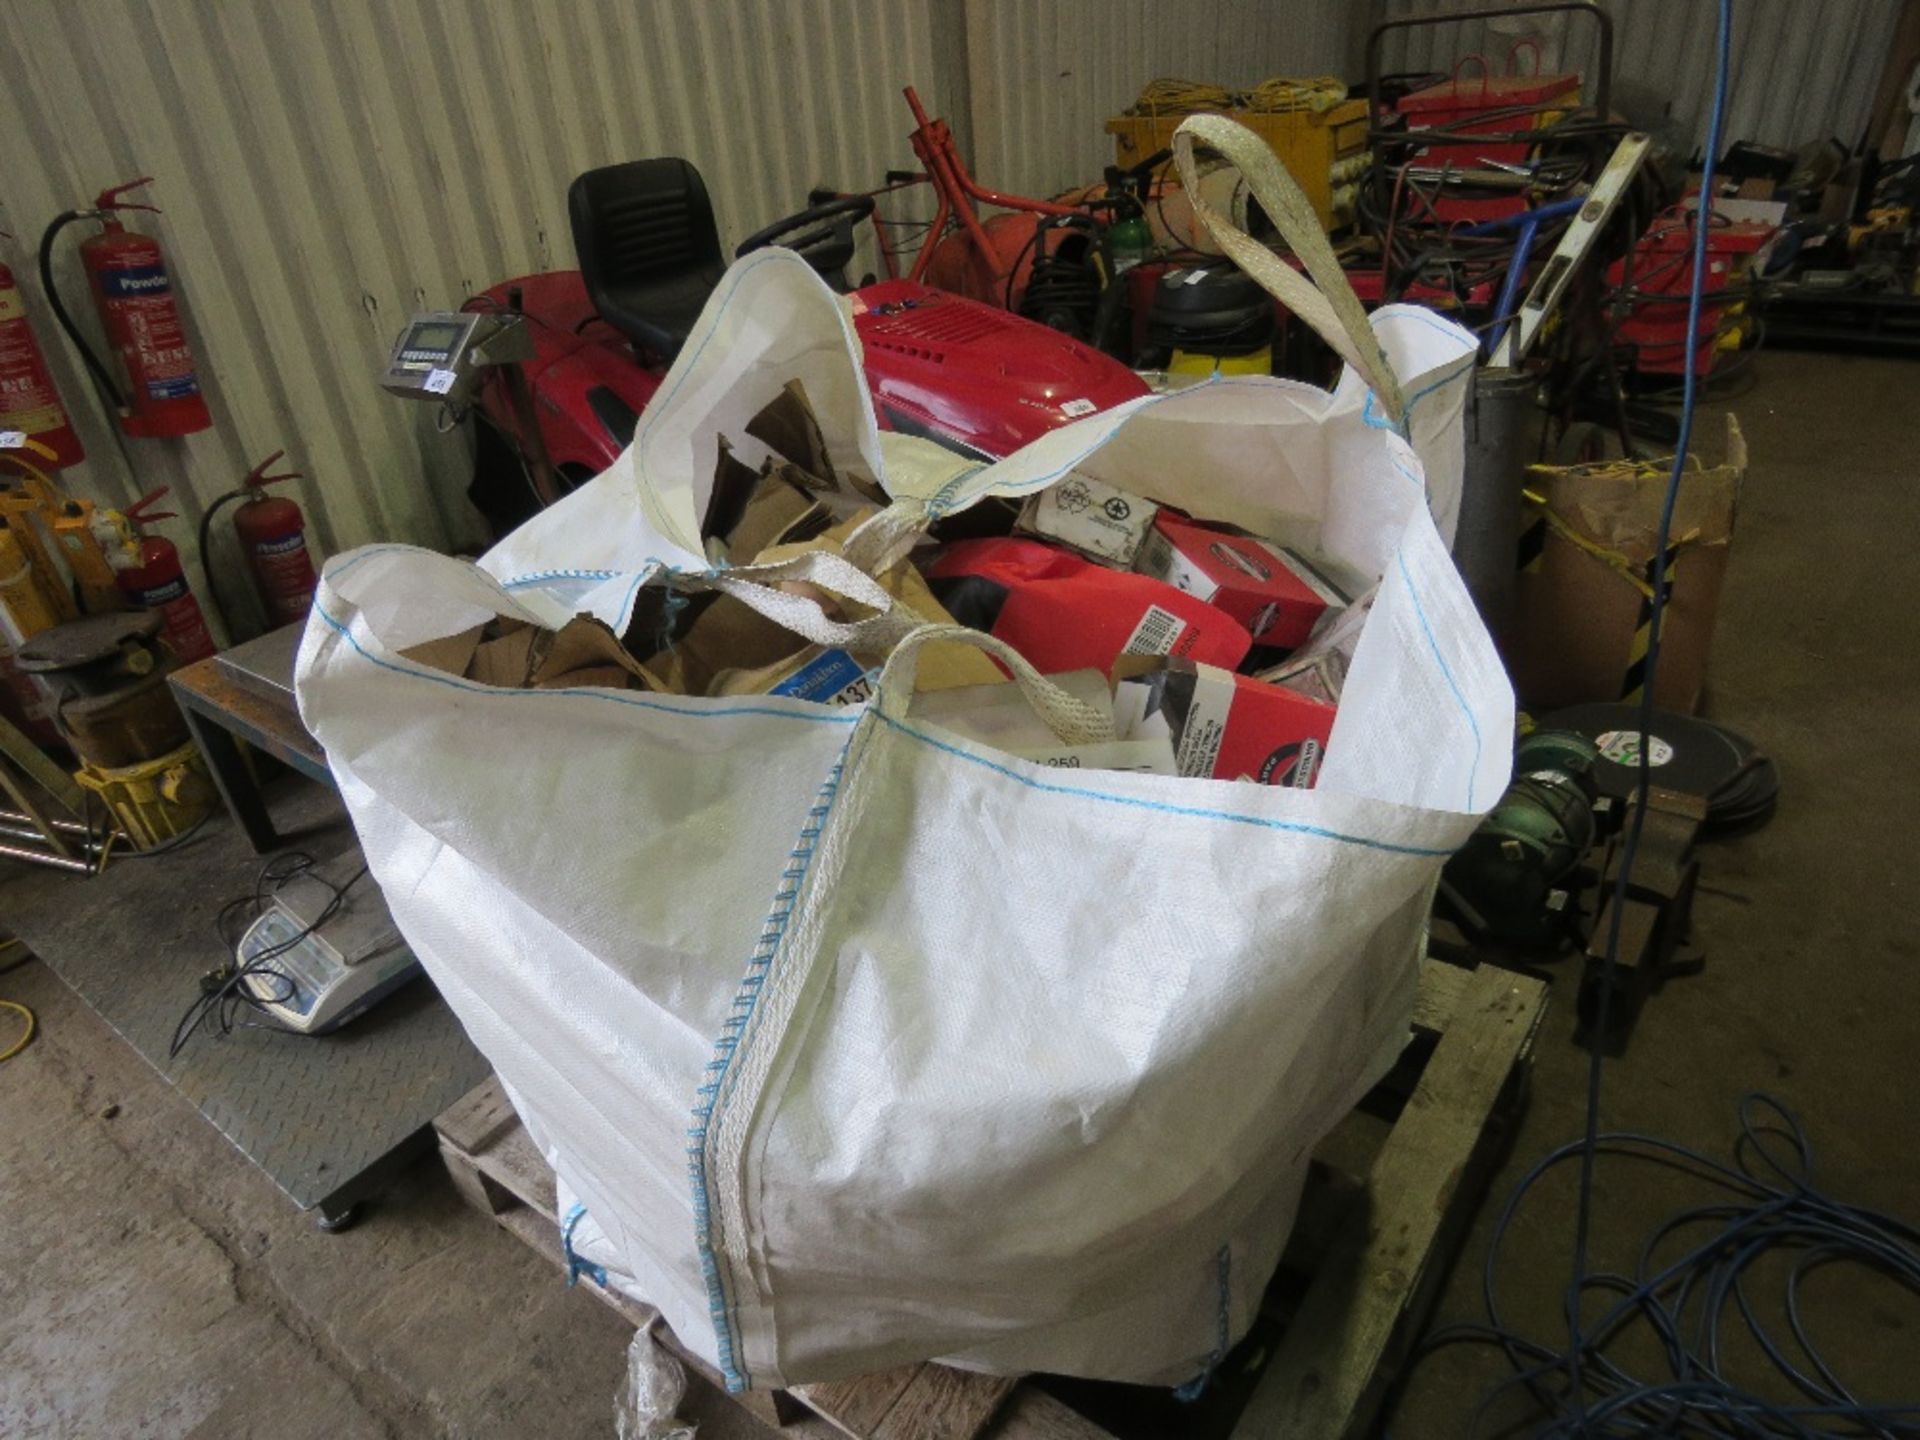 2 X BULK BAGS CONTAINING MOWER SPARES PLUS MACHINE PARTS. SOURCED FROM SITE CLOSURE/CLEARANCE.